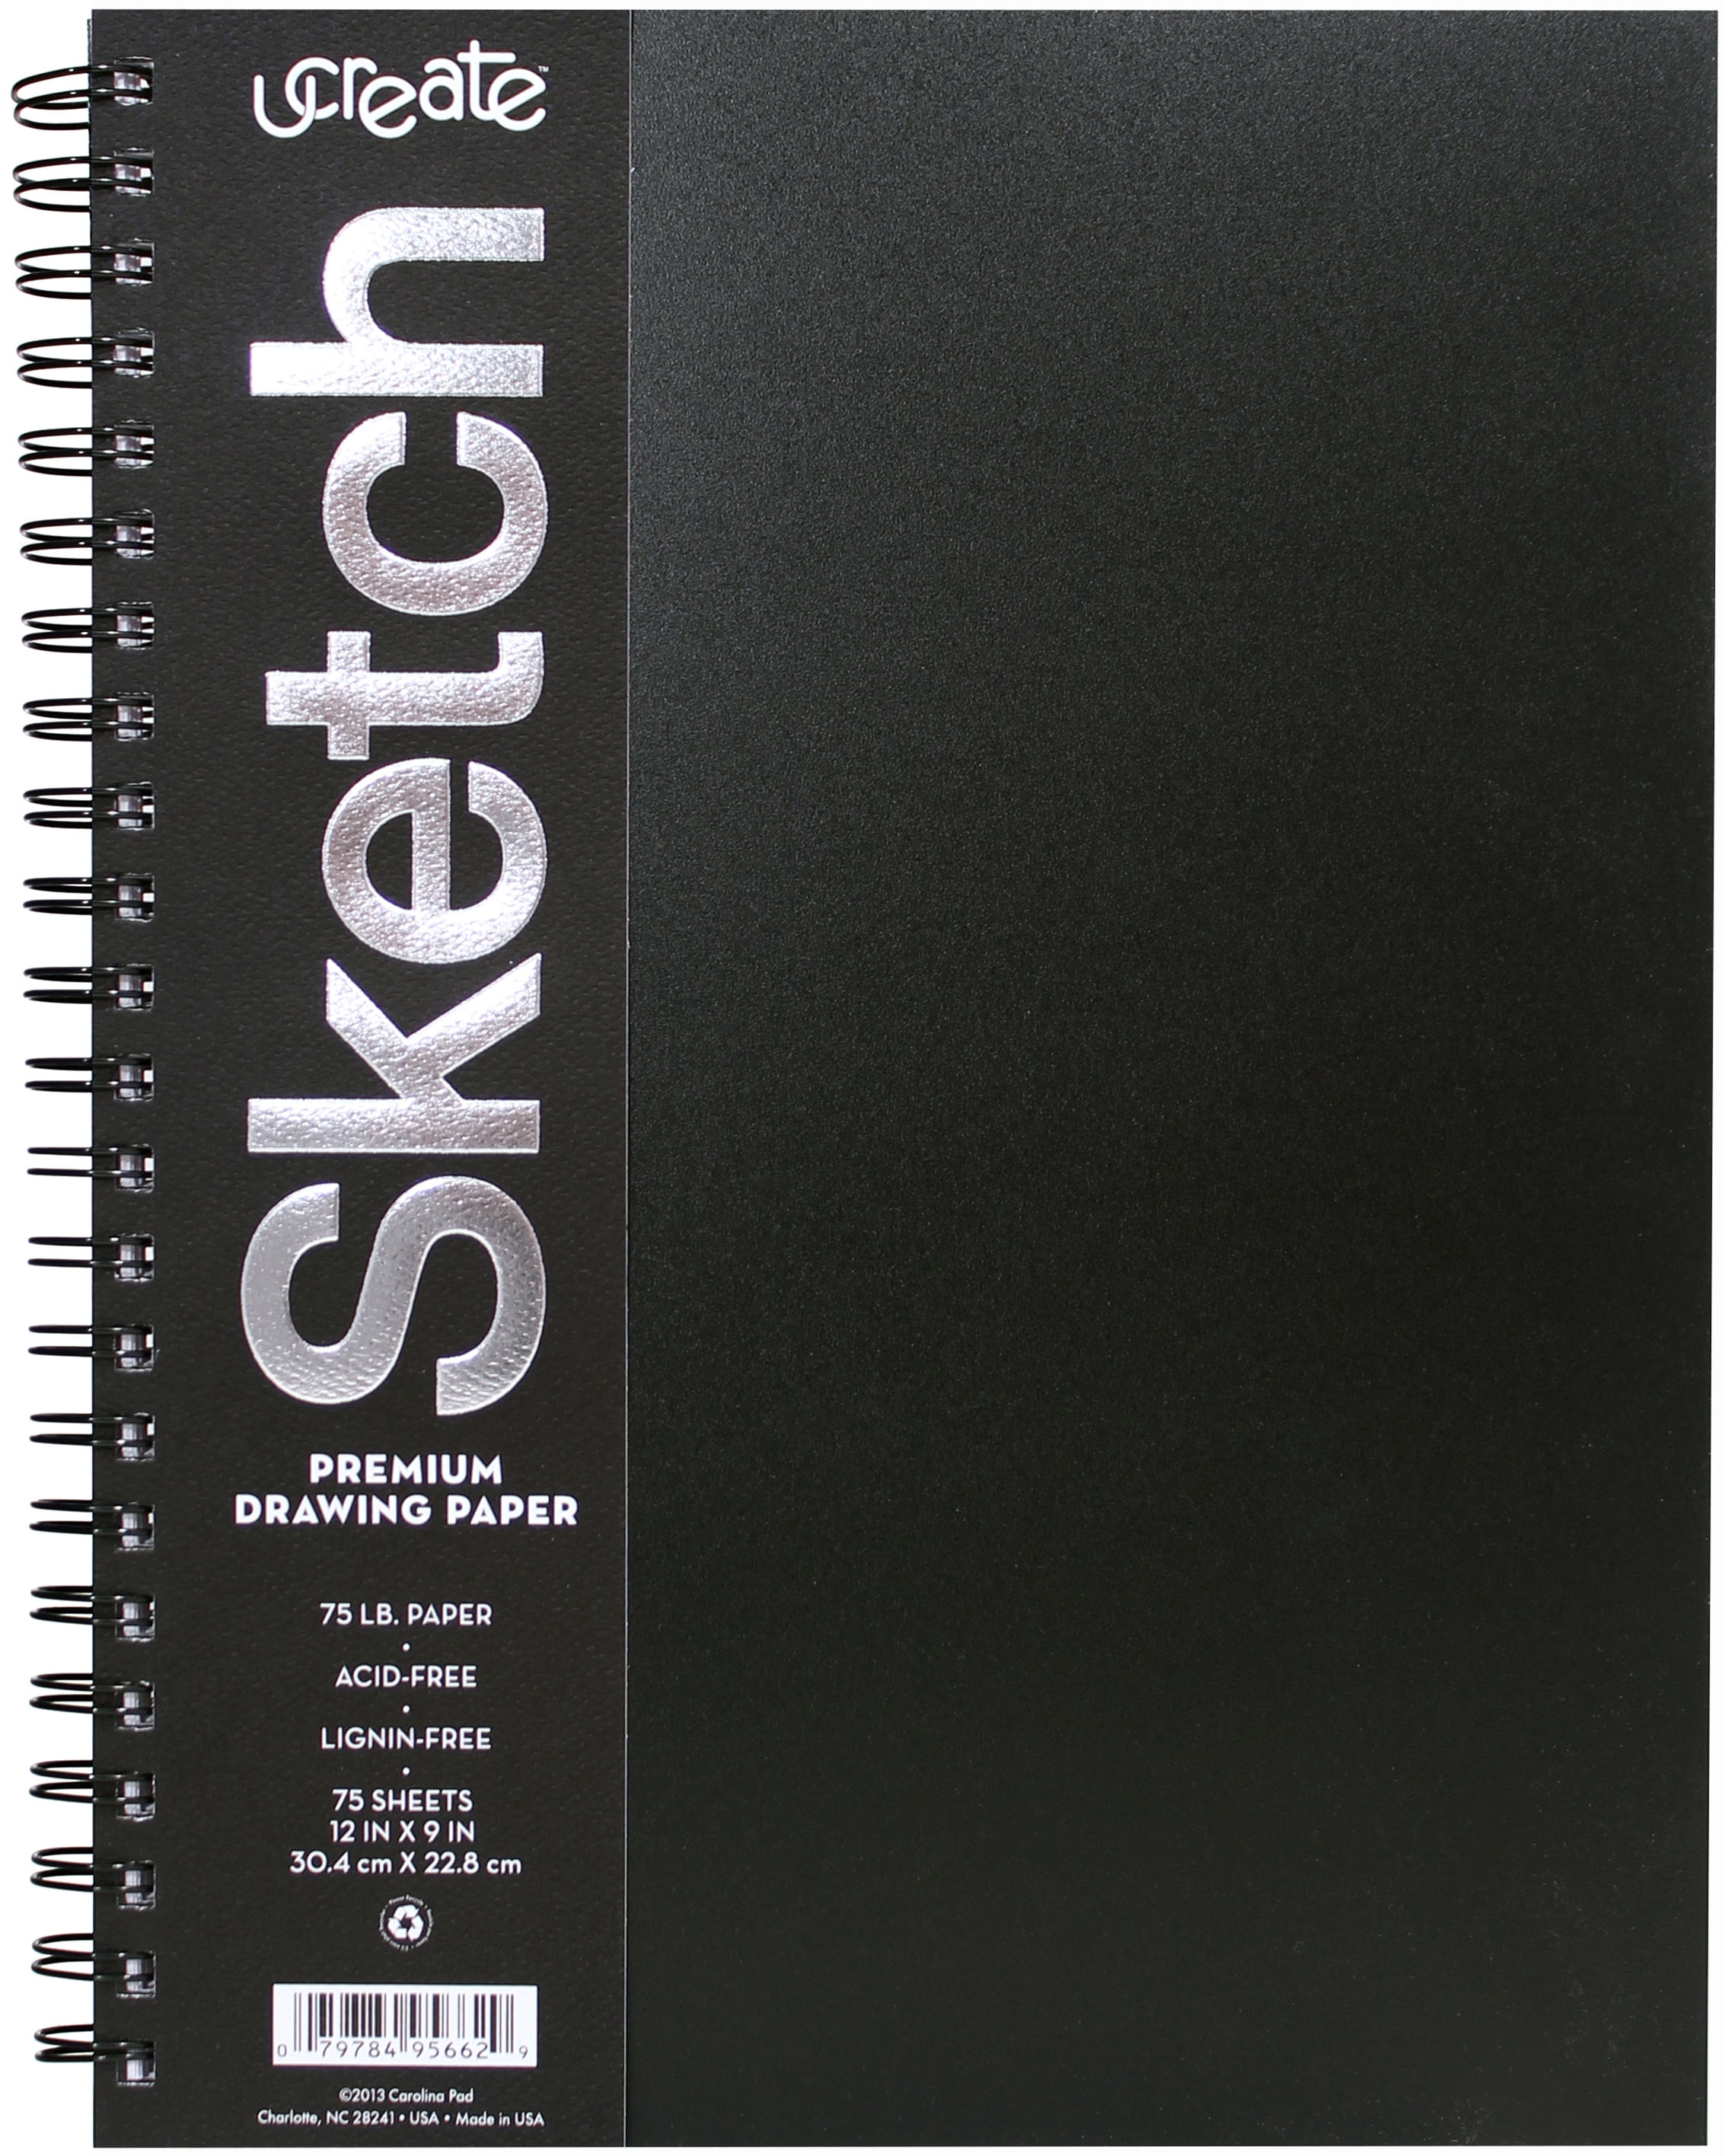 Brite Crown Sketch Pad - 9x12 Sketch Book (100 Sheets) Perforated Sketchbook  Art Paper for Pencils, Pens, Markers, Charcoal and Dry Media - 64lb (95gsm)  Acid-Free Drawing Paper 